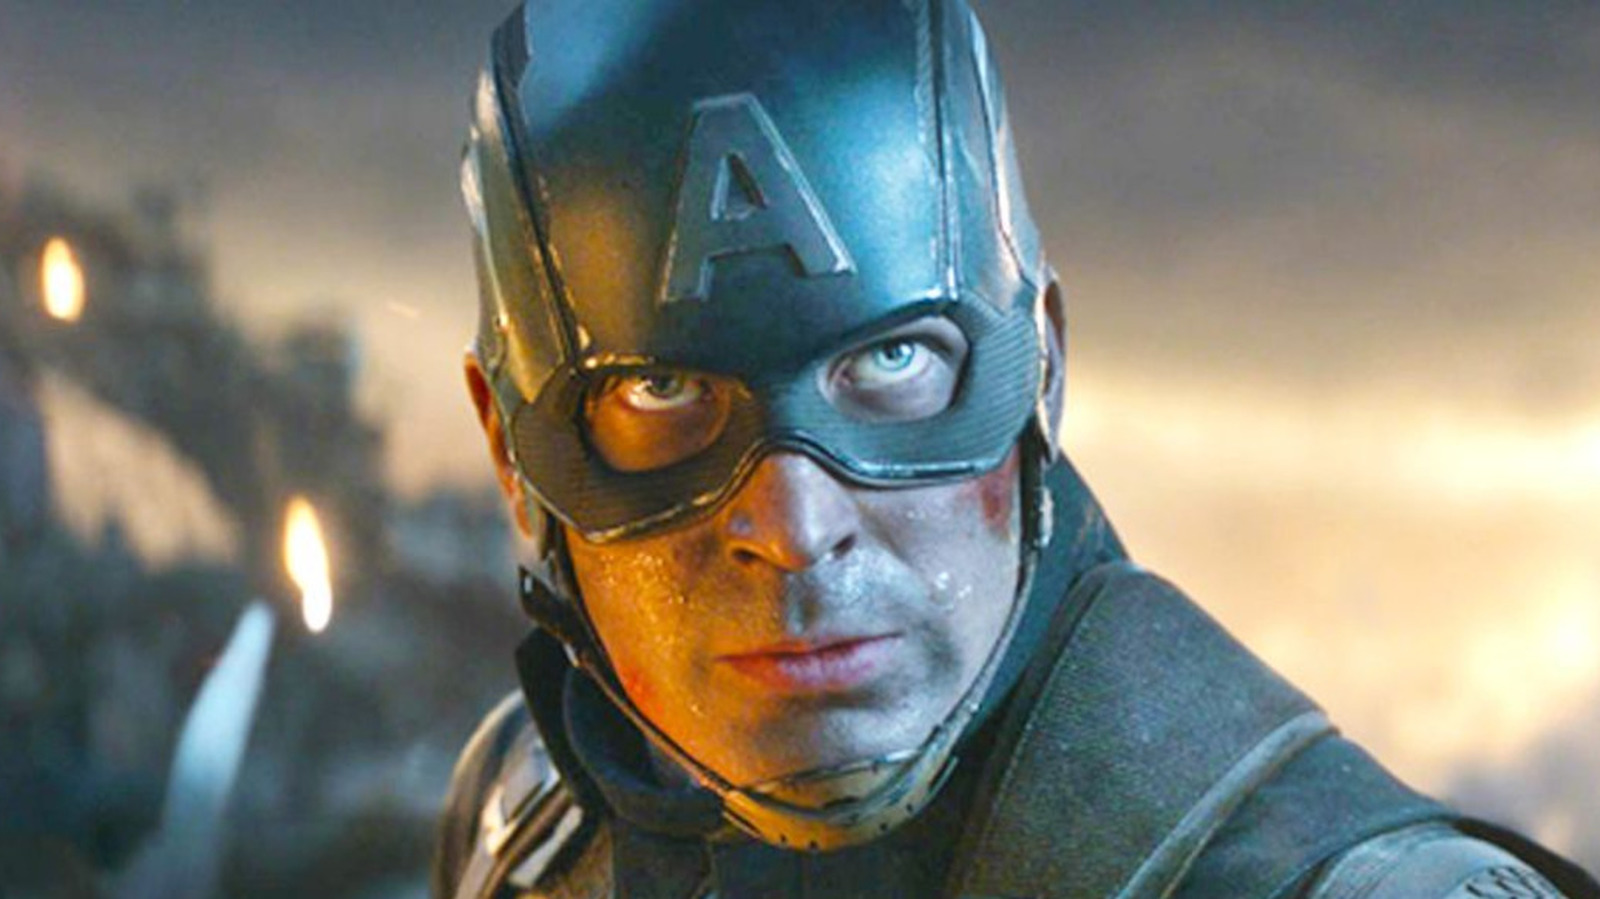 Avengers: Endgame Is No Longer The Top Global Box Office Movie Of All-Time